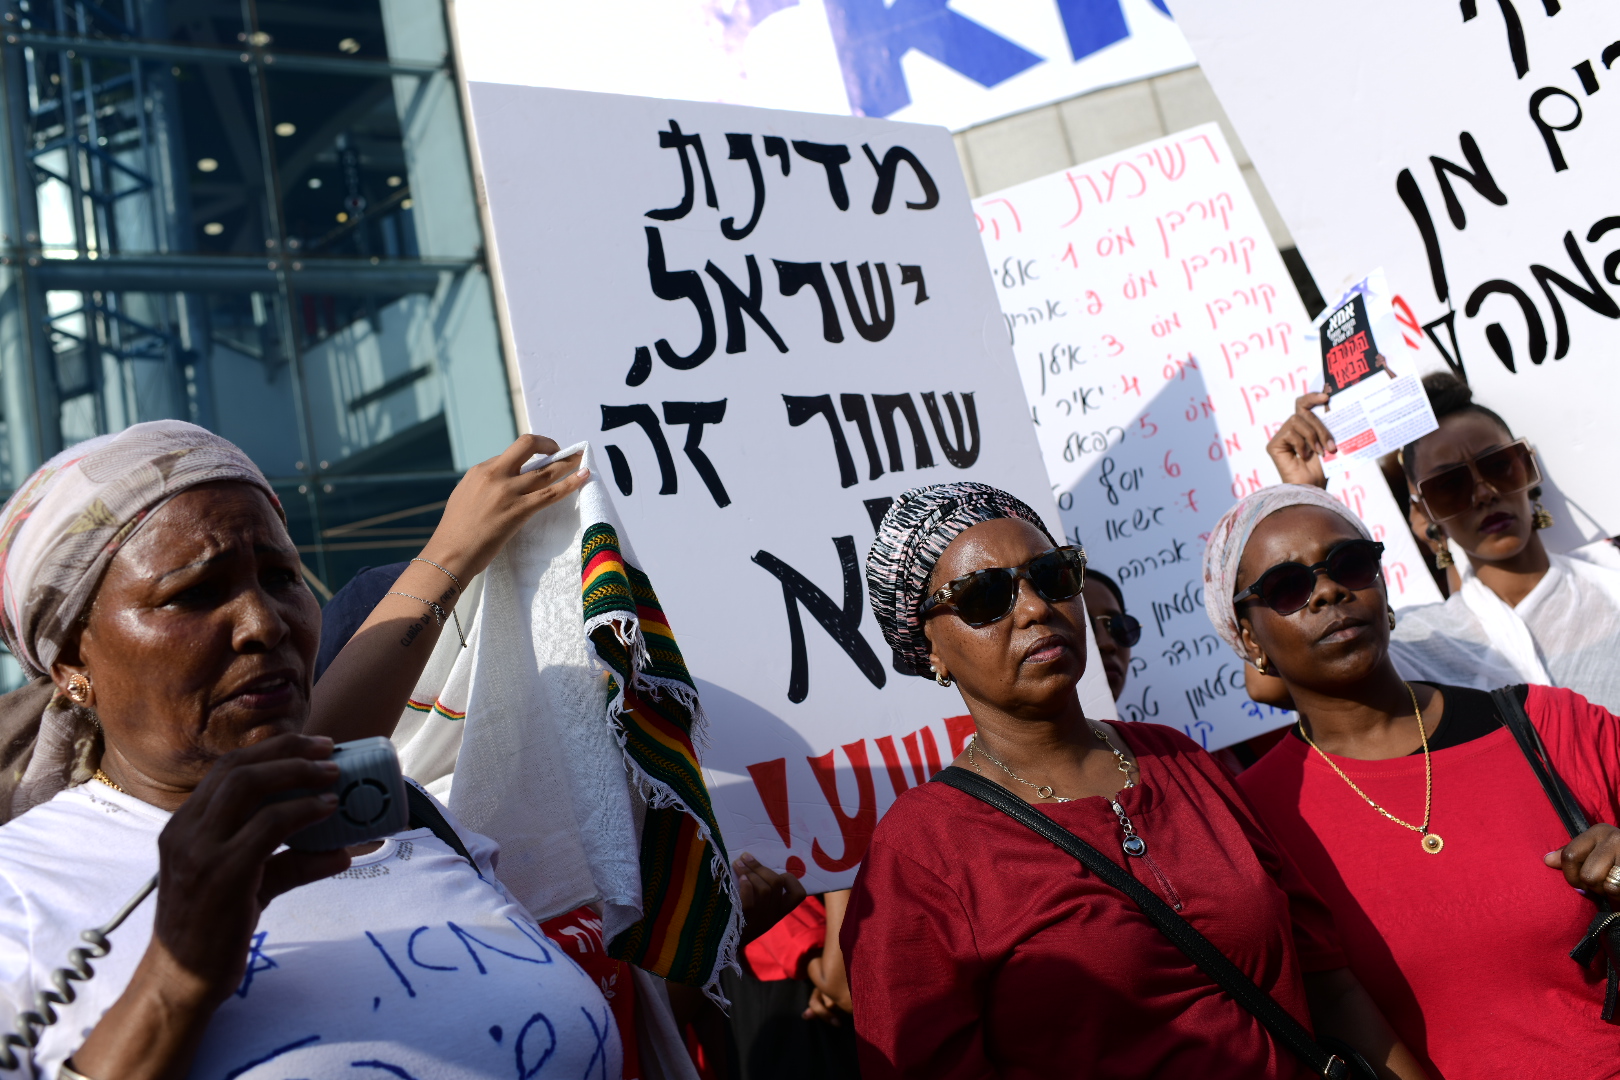 Ethiopians and supporters take part in a protest against police violence and discrimination following the death of 19-year-old Ethiopian, Solomon Tekah who was shot and killed few days ago in Kiryat Haim by an off-duty police officer, in Tel Aviv, July 8, 2019. Photo by Tomer Neuberg/Flash90